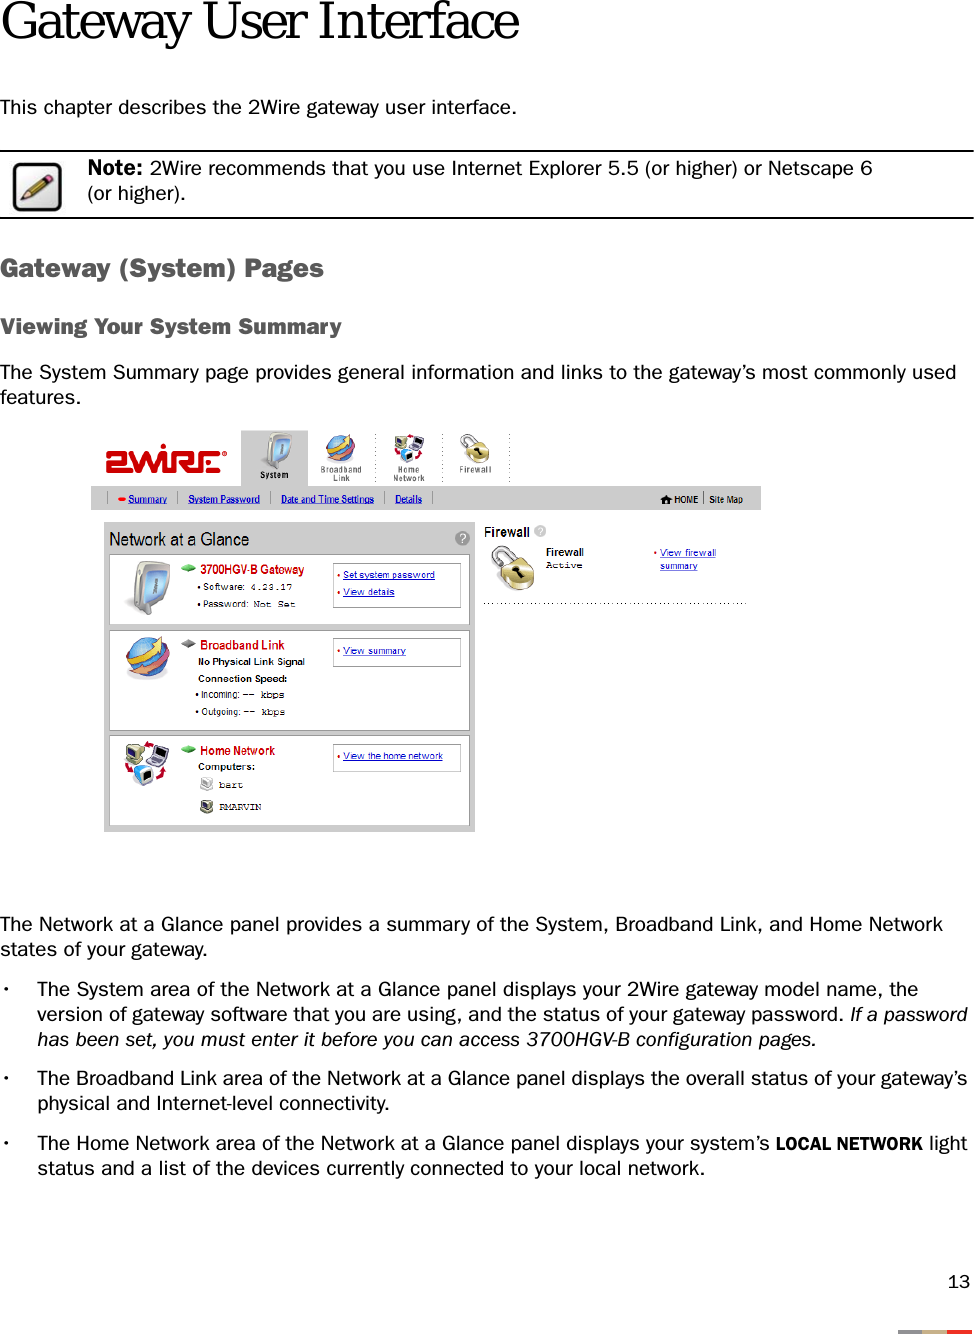 13Gateway User InterfaceThis chapter describes the 2Wire gateway user interface.Note: 2Wire recommends that you use Internet Explorer 5.5 (or higher) or Netscape 6 (or higher).Gateway (System) PagesViewing Your System SummaryThe System Summary page provides general information and links to the gateway’s most commonly used features.The Network at a Glance panel provides a summary of the System, Broadband Link, and Home Network states of your gateway.• The System area of the Network at a Glance panel displays your 2Wire gateway model name, the version of gateway software that you are using, and the status of your gateway password. If a password has been set, you must enter it before you can access 3700HGV-B configuration pages.• The Broadband Link area of the Network at a Glance panel displays the overall status of your gateway’s physical and Internet-level connectivity. • The Home Network area of the Network at a Glance panel displays your system’s LOCAL NETWORK light status and a list of the devices currently connected to your local network.